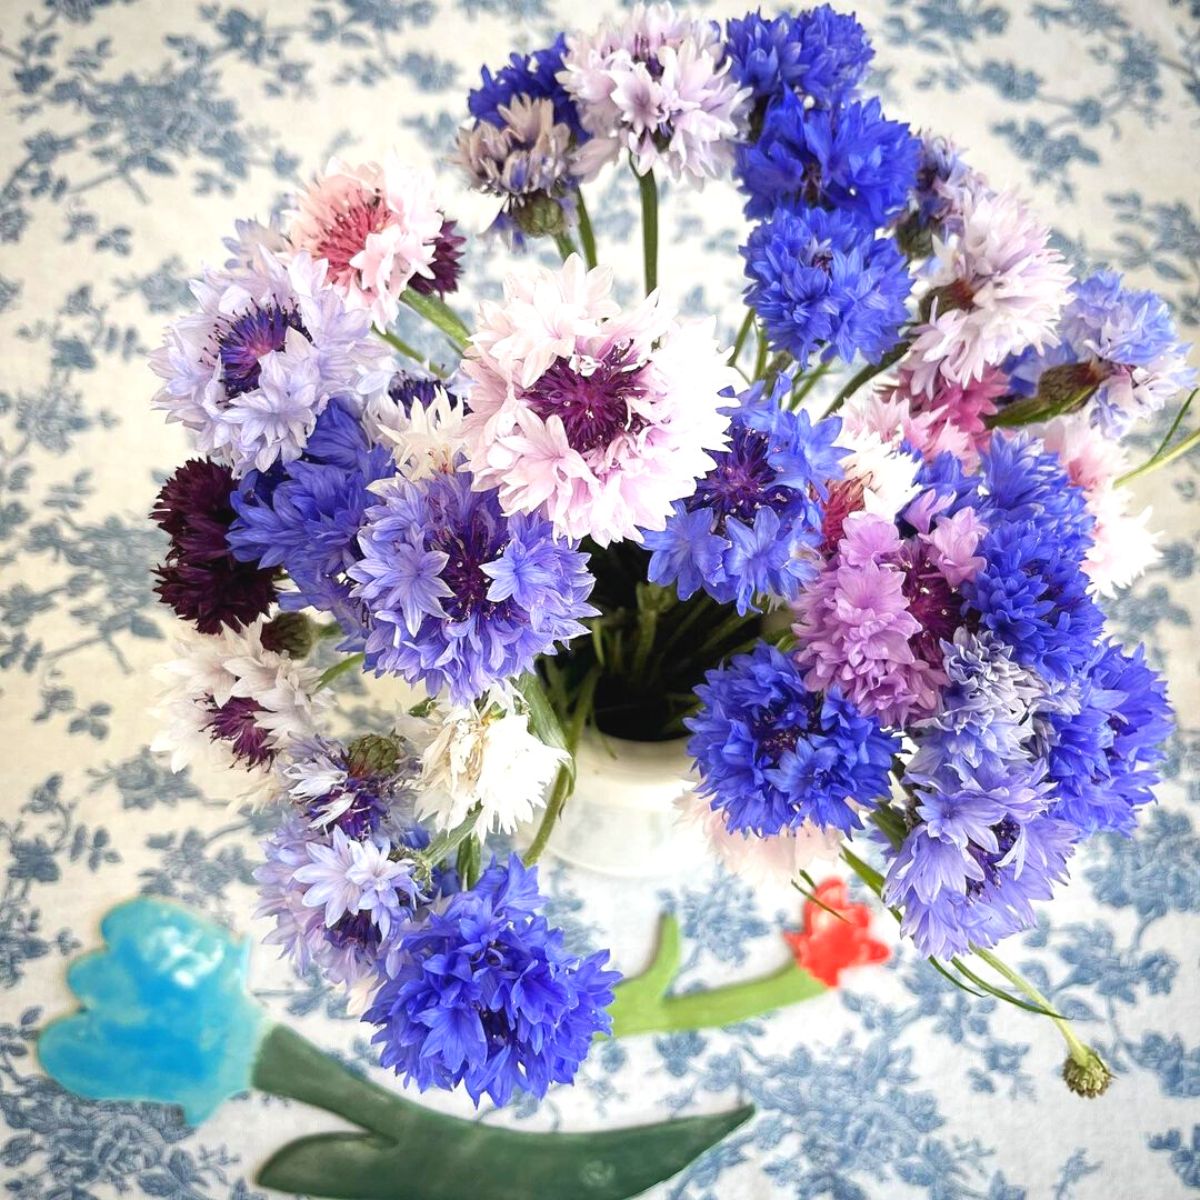 Cornflowers in different shades of blue